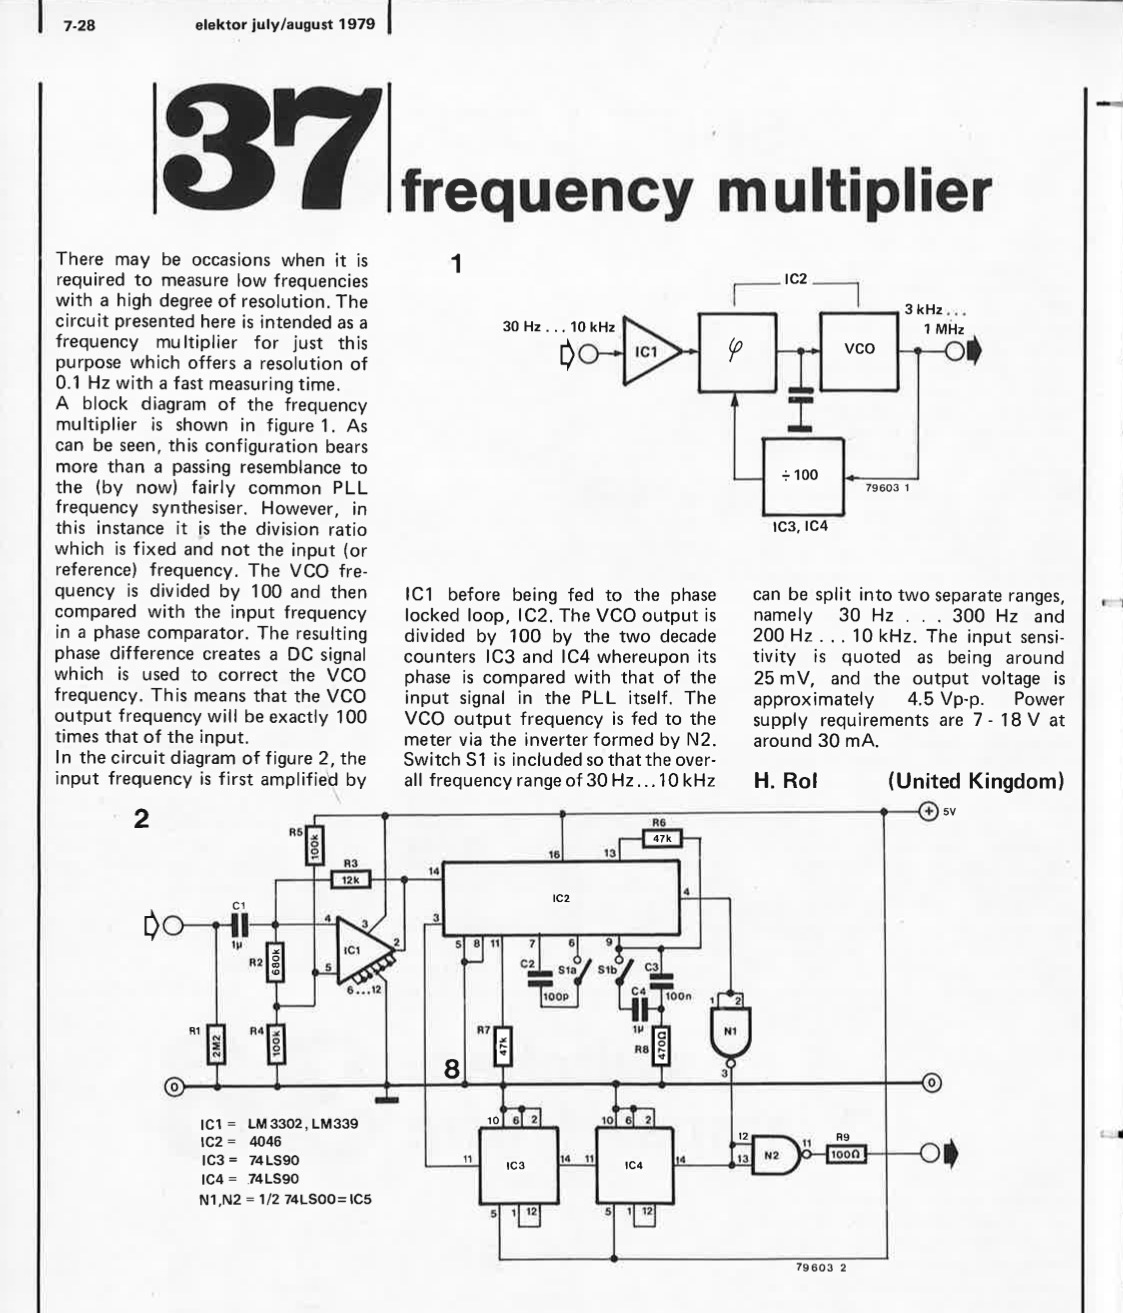 frequency synthesiser